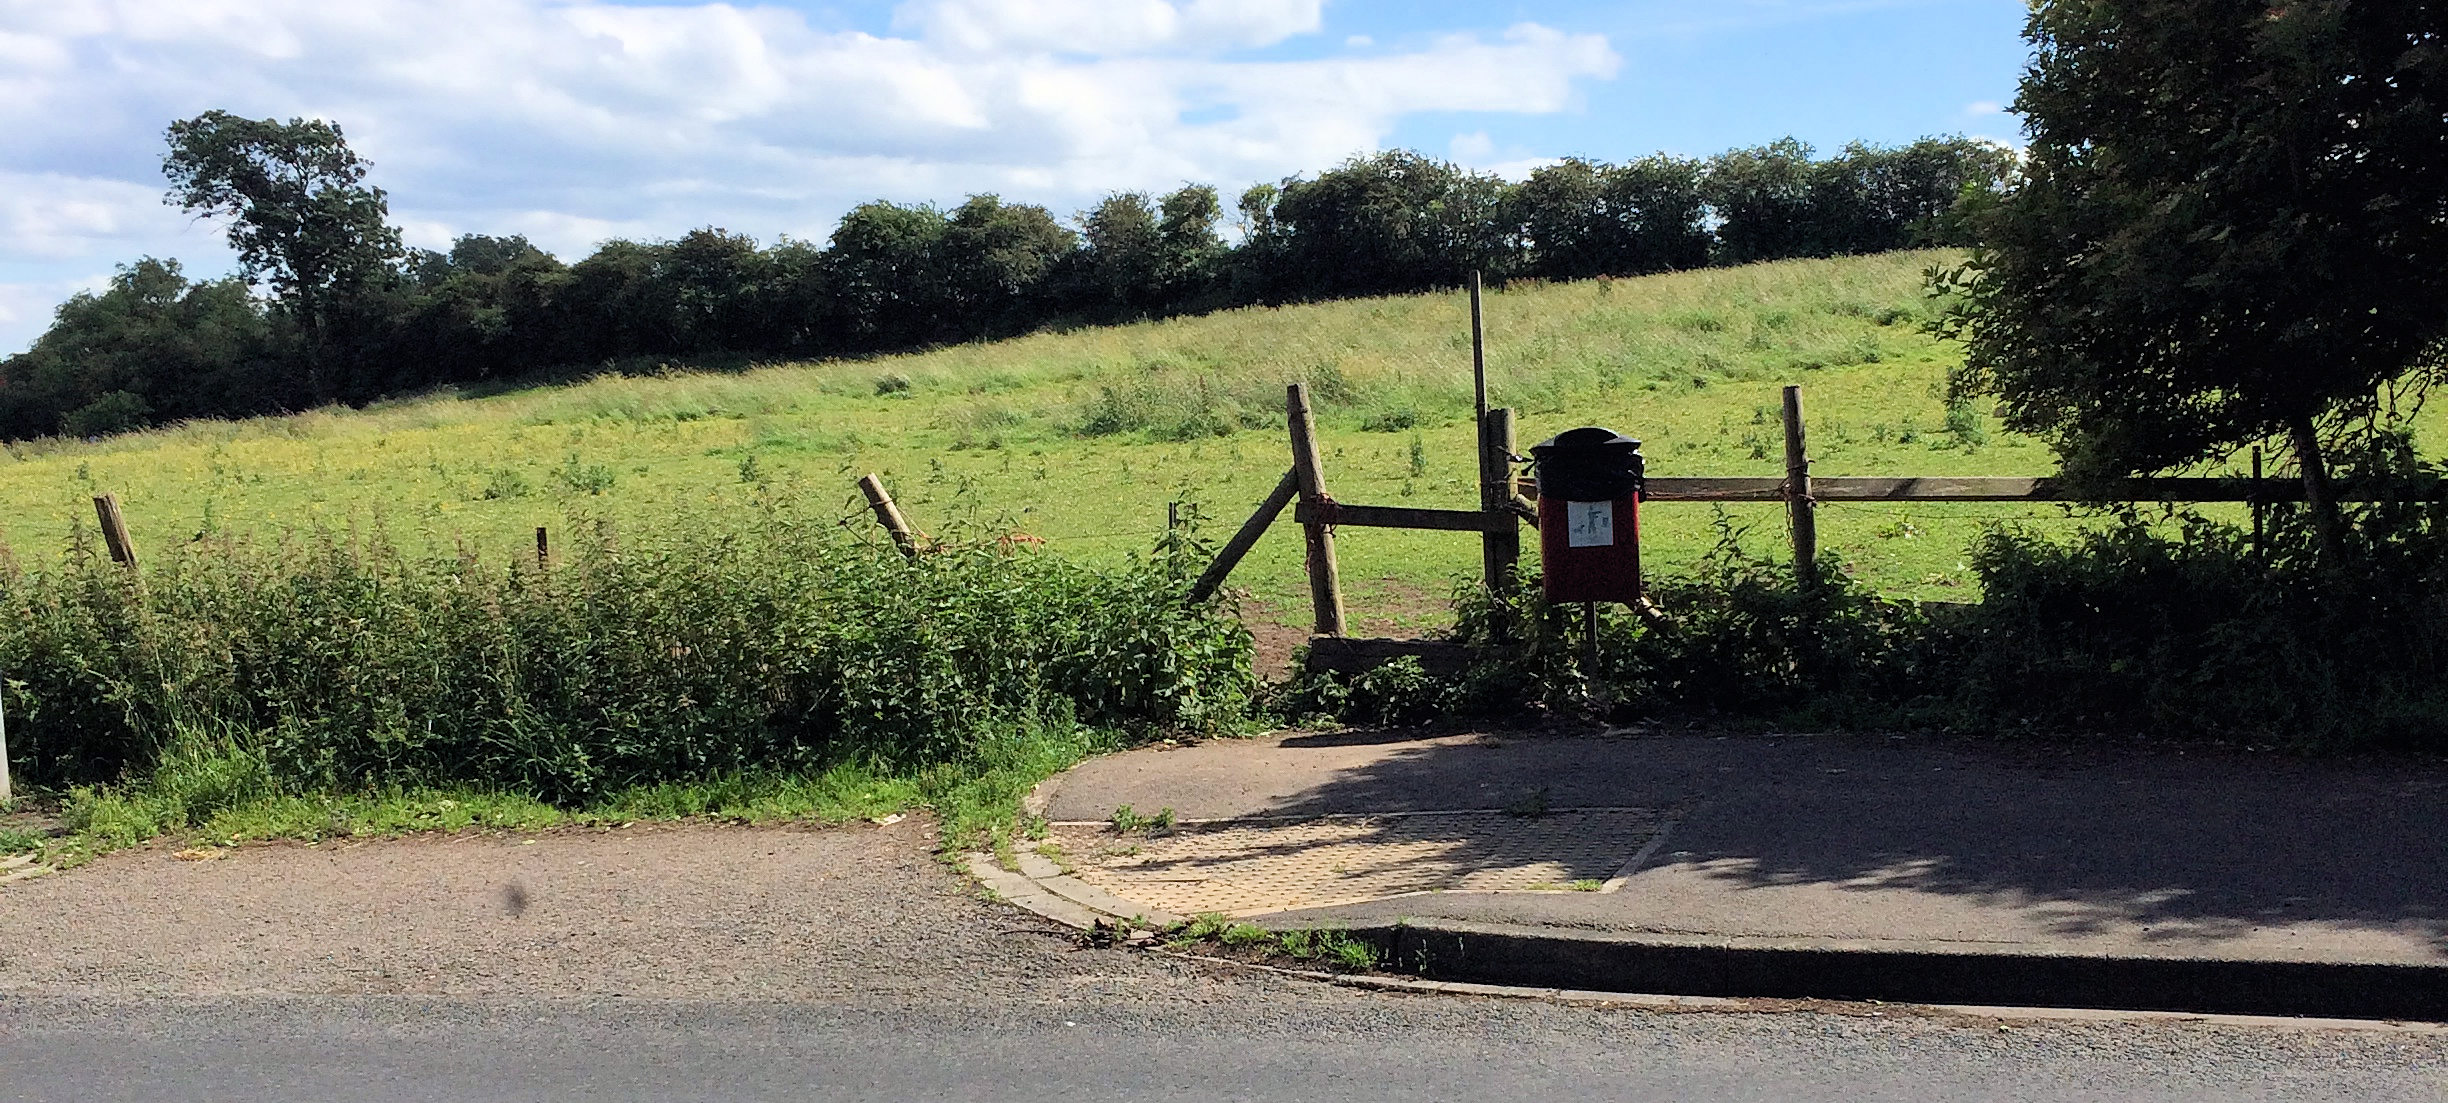 The style access to the Public Right of Way across Acomb Moor has become unstable. We've asked for it to be repaired.